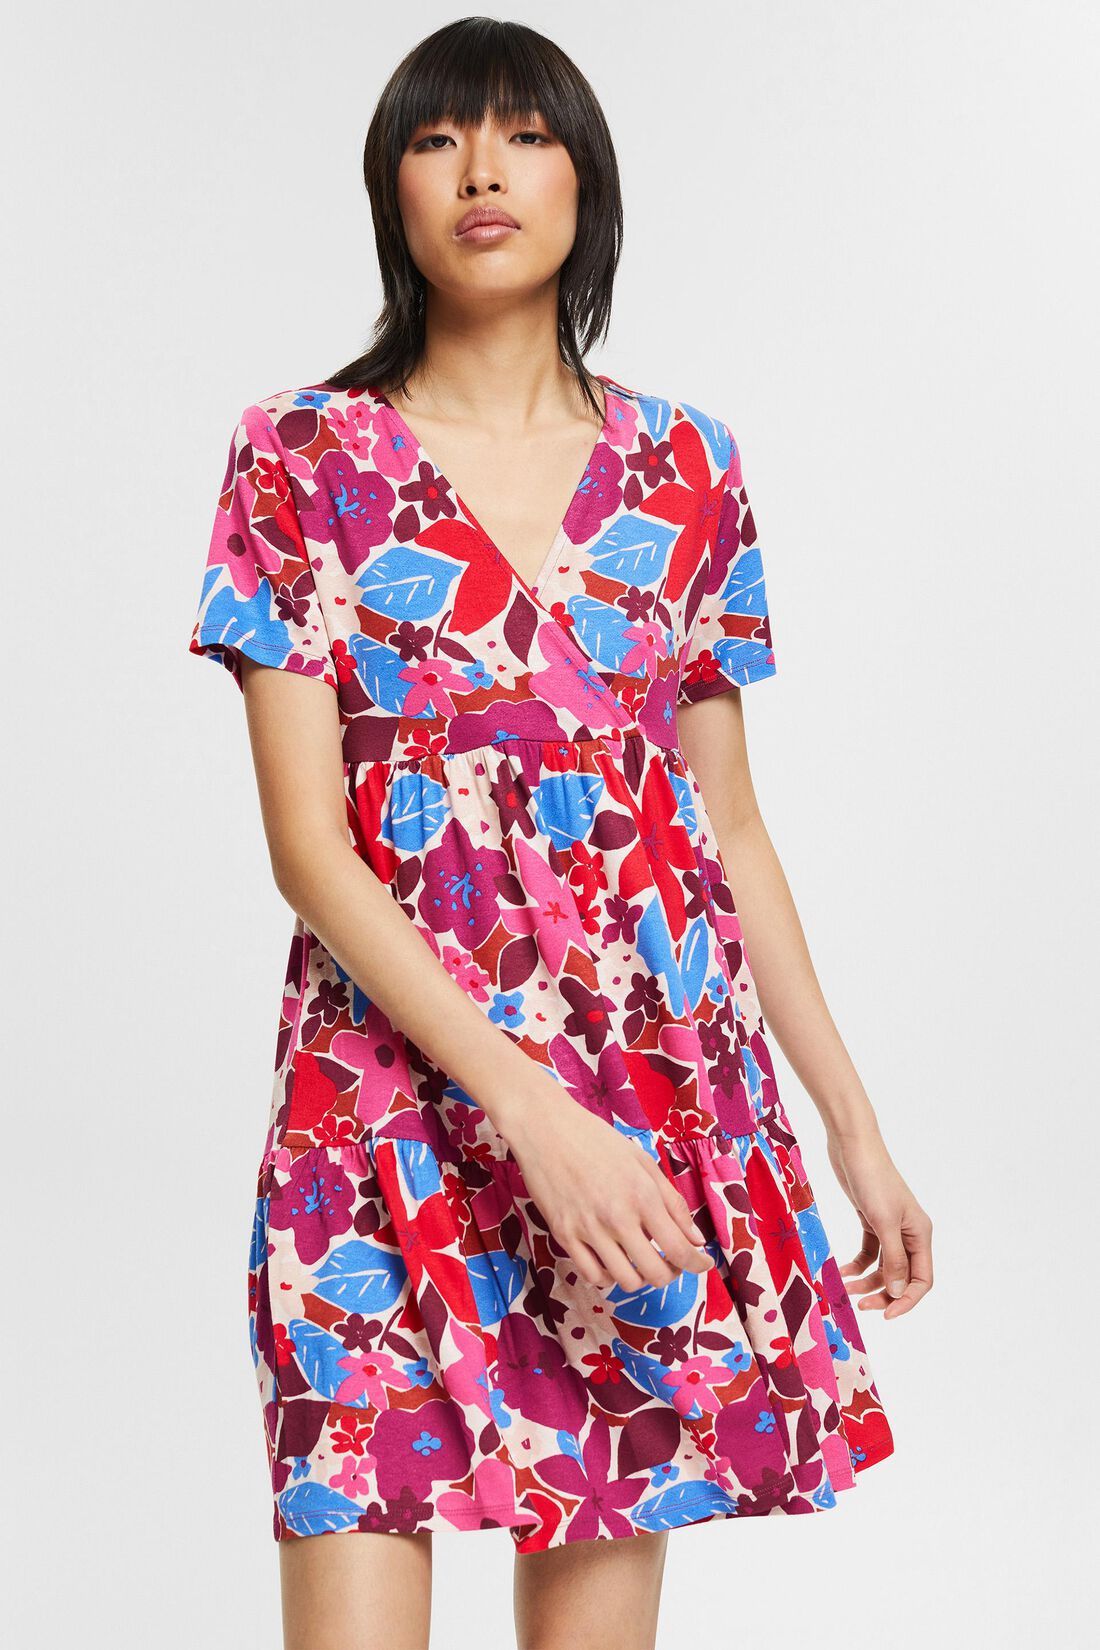 F&F - Spring, is that you? 💐 Floral midi dress, £22 #FandFClothing #Tesco  #IOnlyPoppedInFor